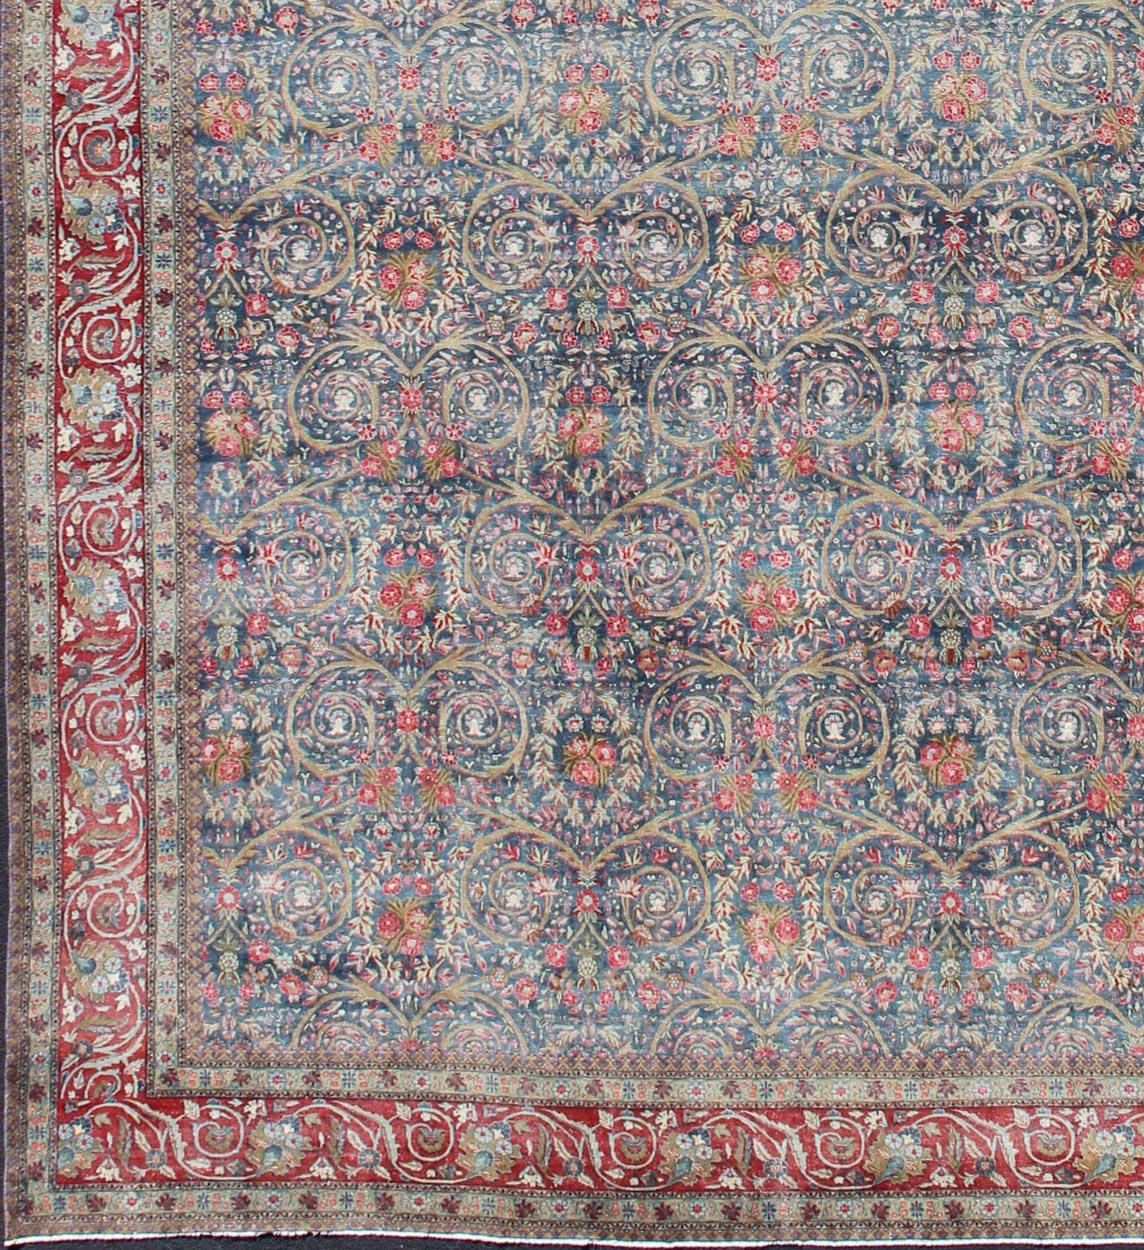 Blue background, Red border and multi colors such as light green, taupe, light blue/gray antique Persian Tabriz Large rug with flowers and all-over vine scroll , rug 18-0403, country of origin / type: Iran / Tabriz, circa 1890.
Measures: 14'6 x